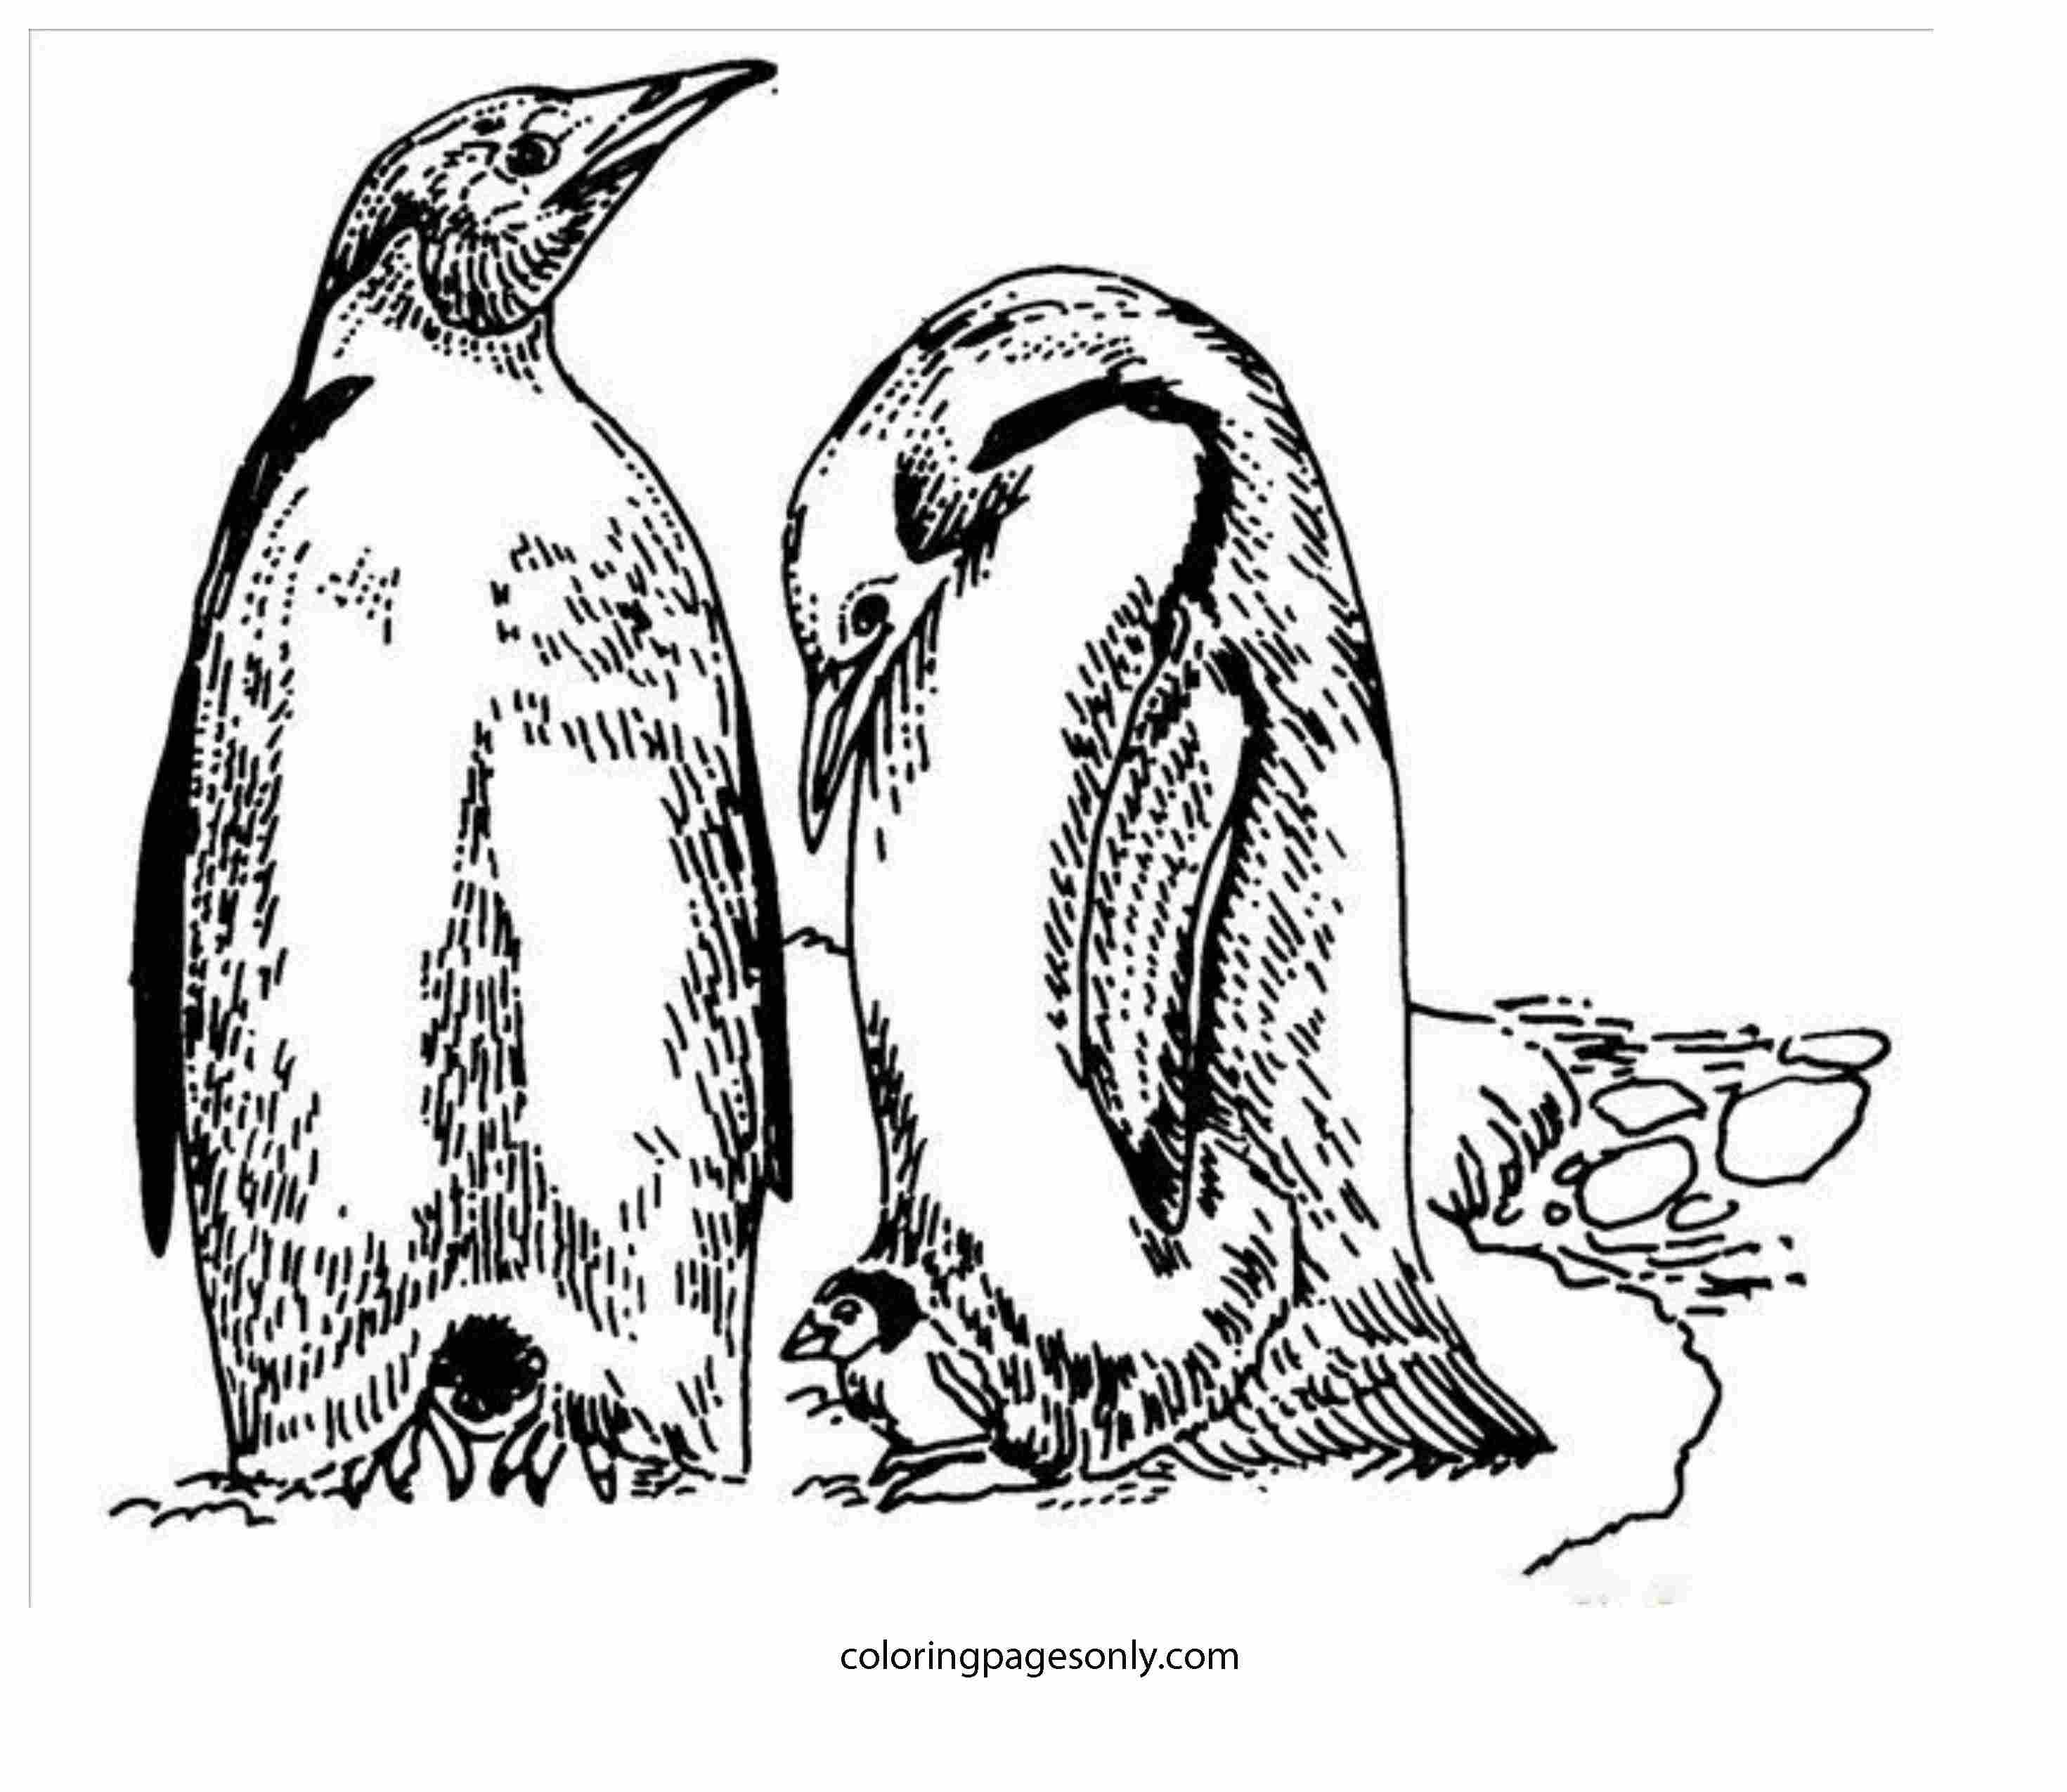 Male and Female Penguin at the Arctic Coloring Page